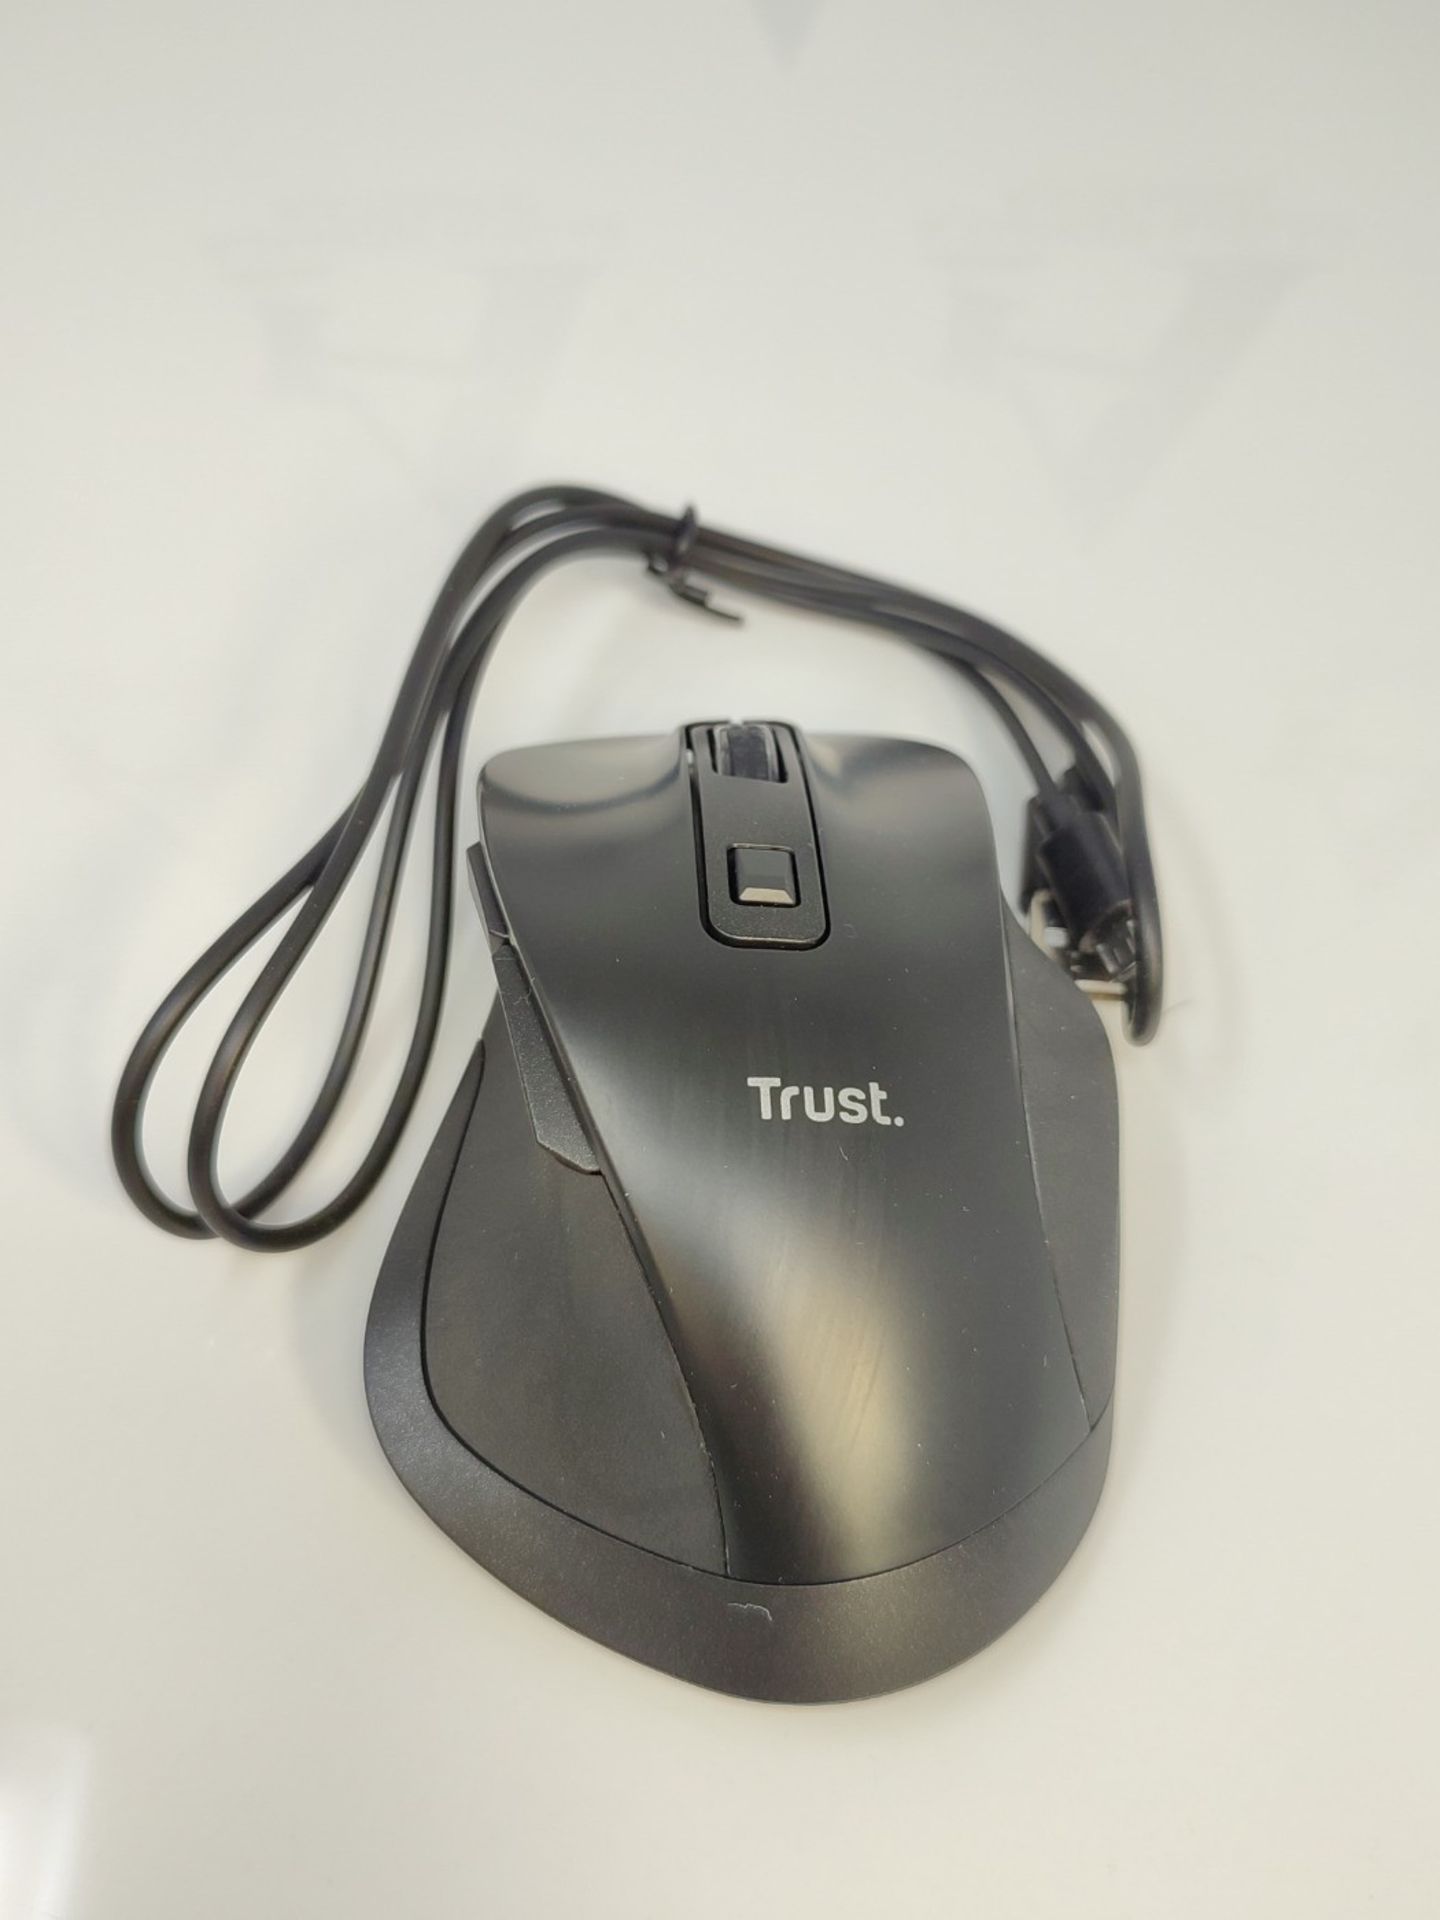 Trust Fyda Mouse Wireless Rechargeable, Sustainable Design, 800-2400 DPI, 6 Buttons, 2 - Image 3 of 3